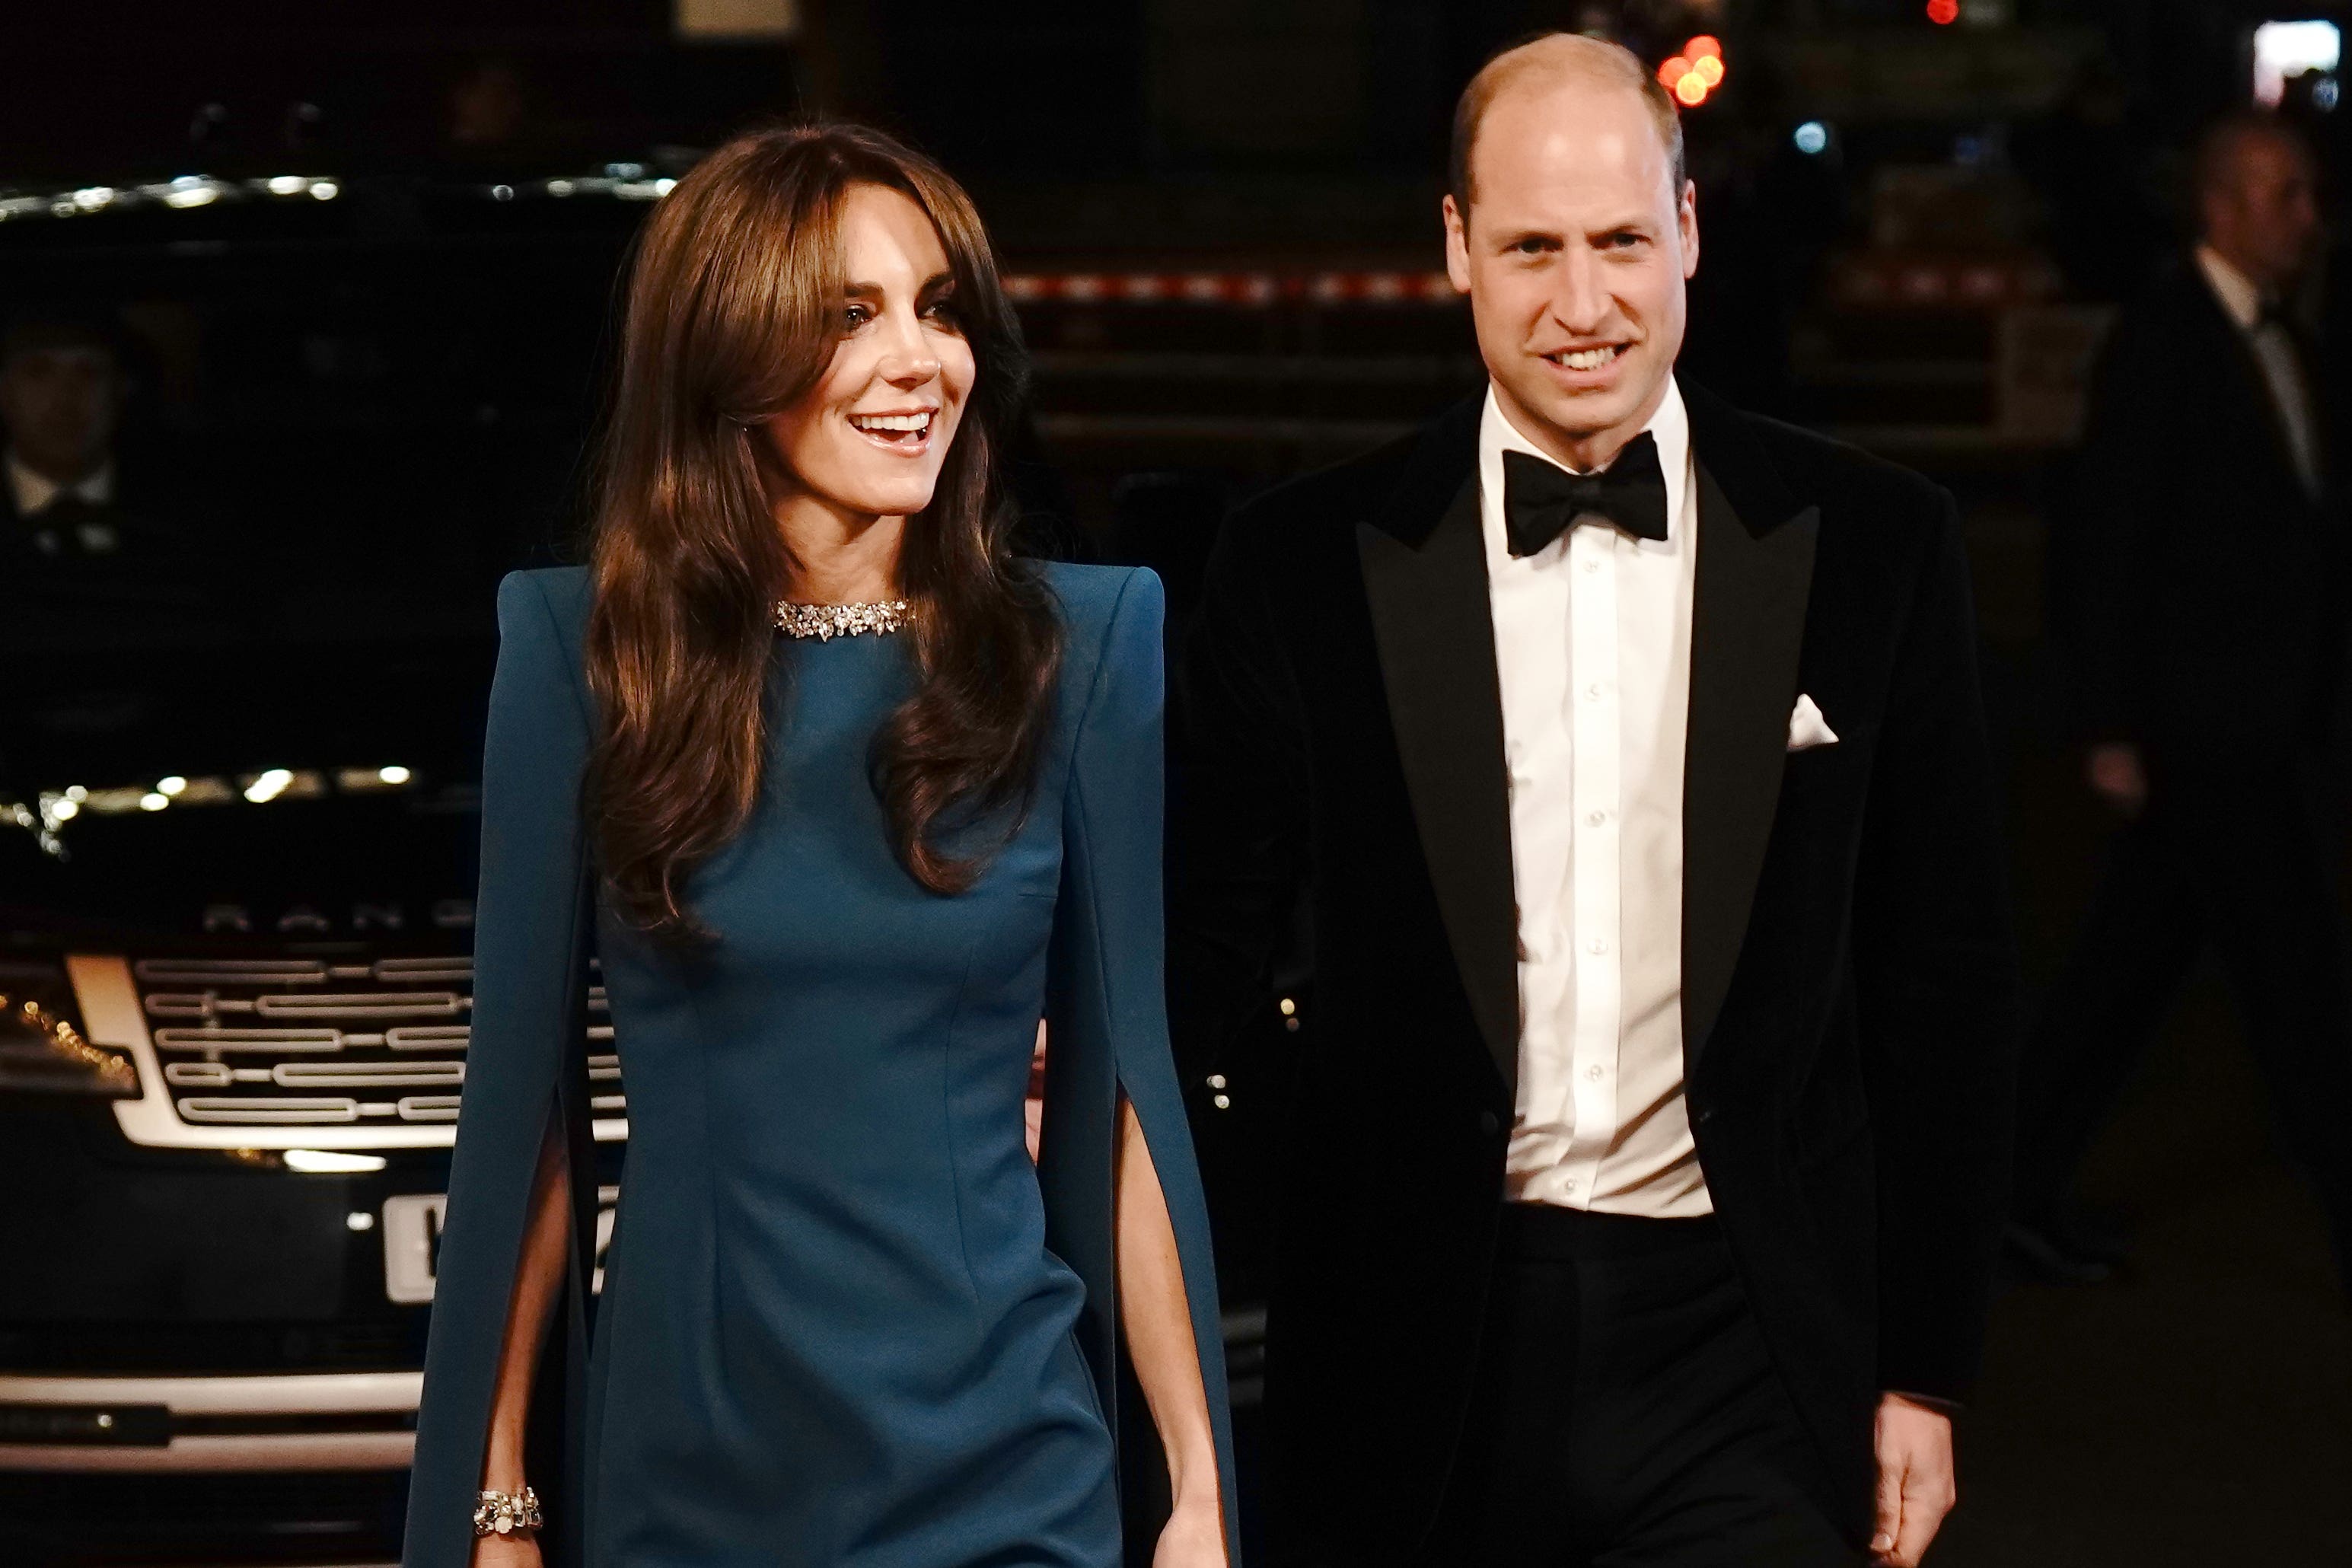 The Prince and Princess of Wales arrive for the Royal Variety Performance at the Royal Albert Hall